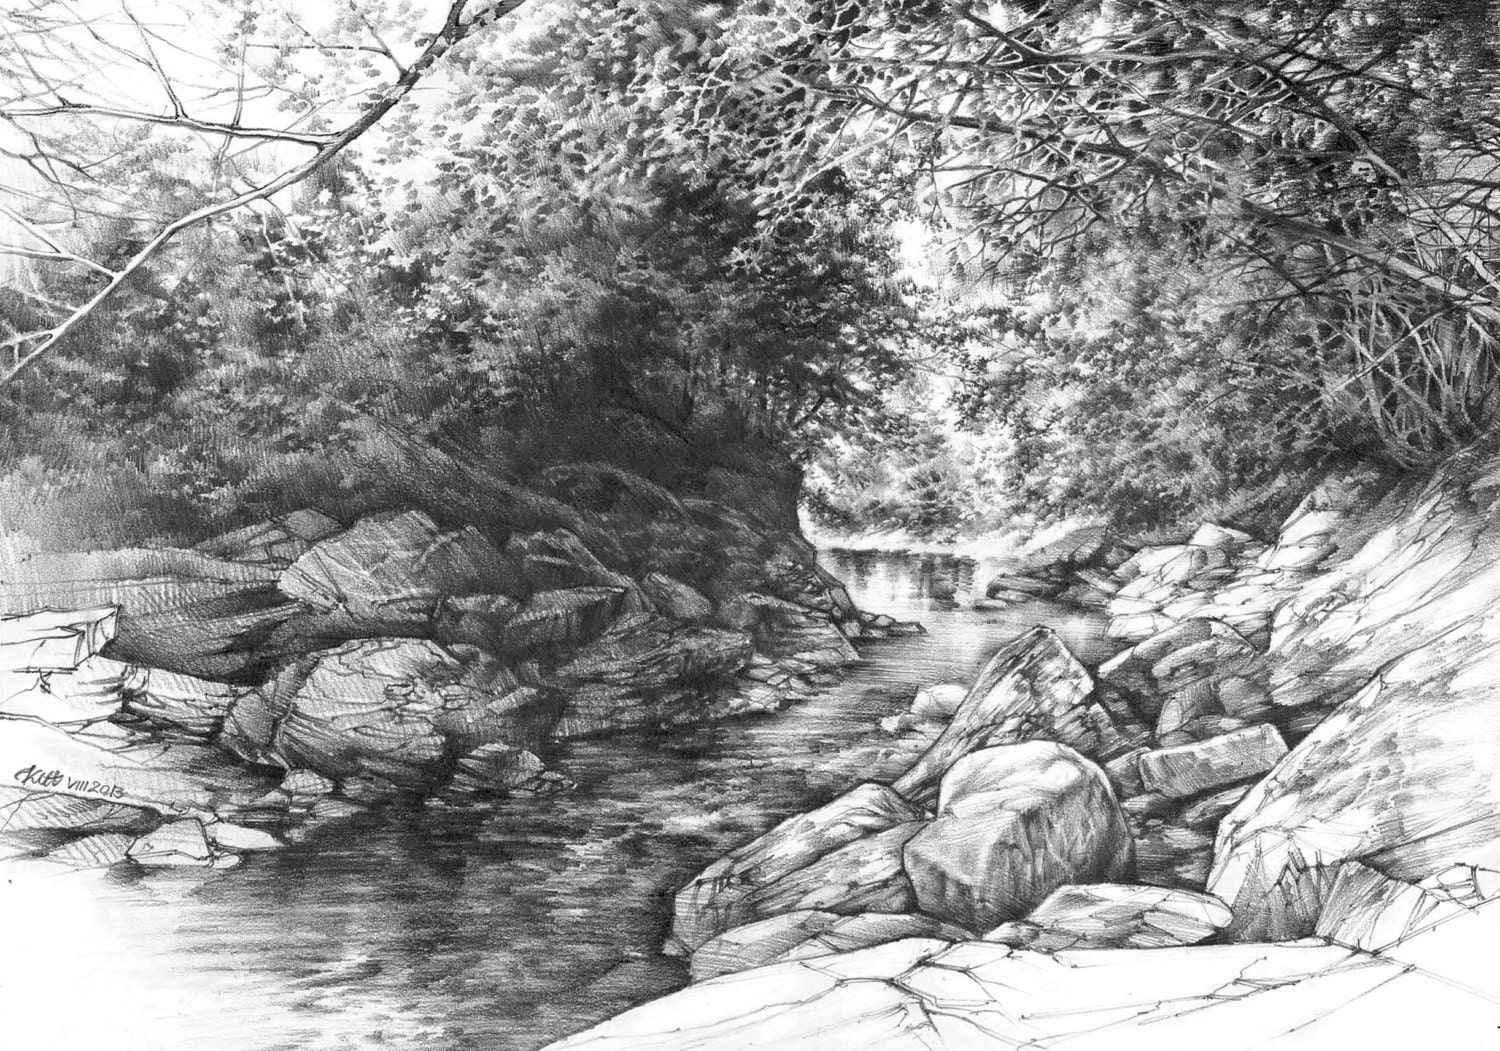 waterscape pencil trees drawing mountain river pencil landscape drawing print realistic water landscape nature sketch art print